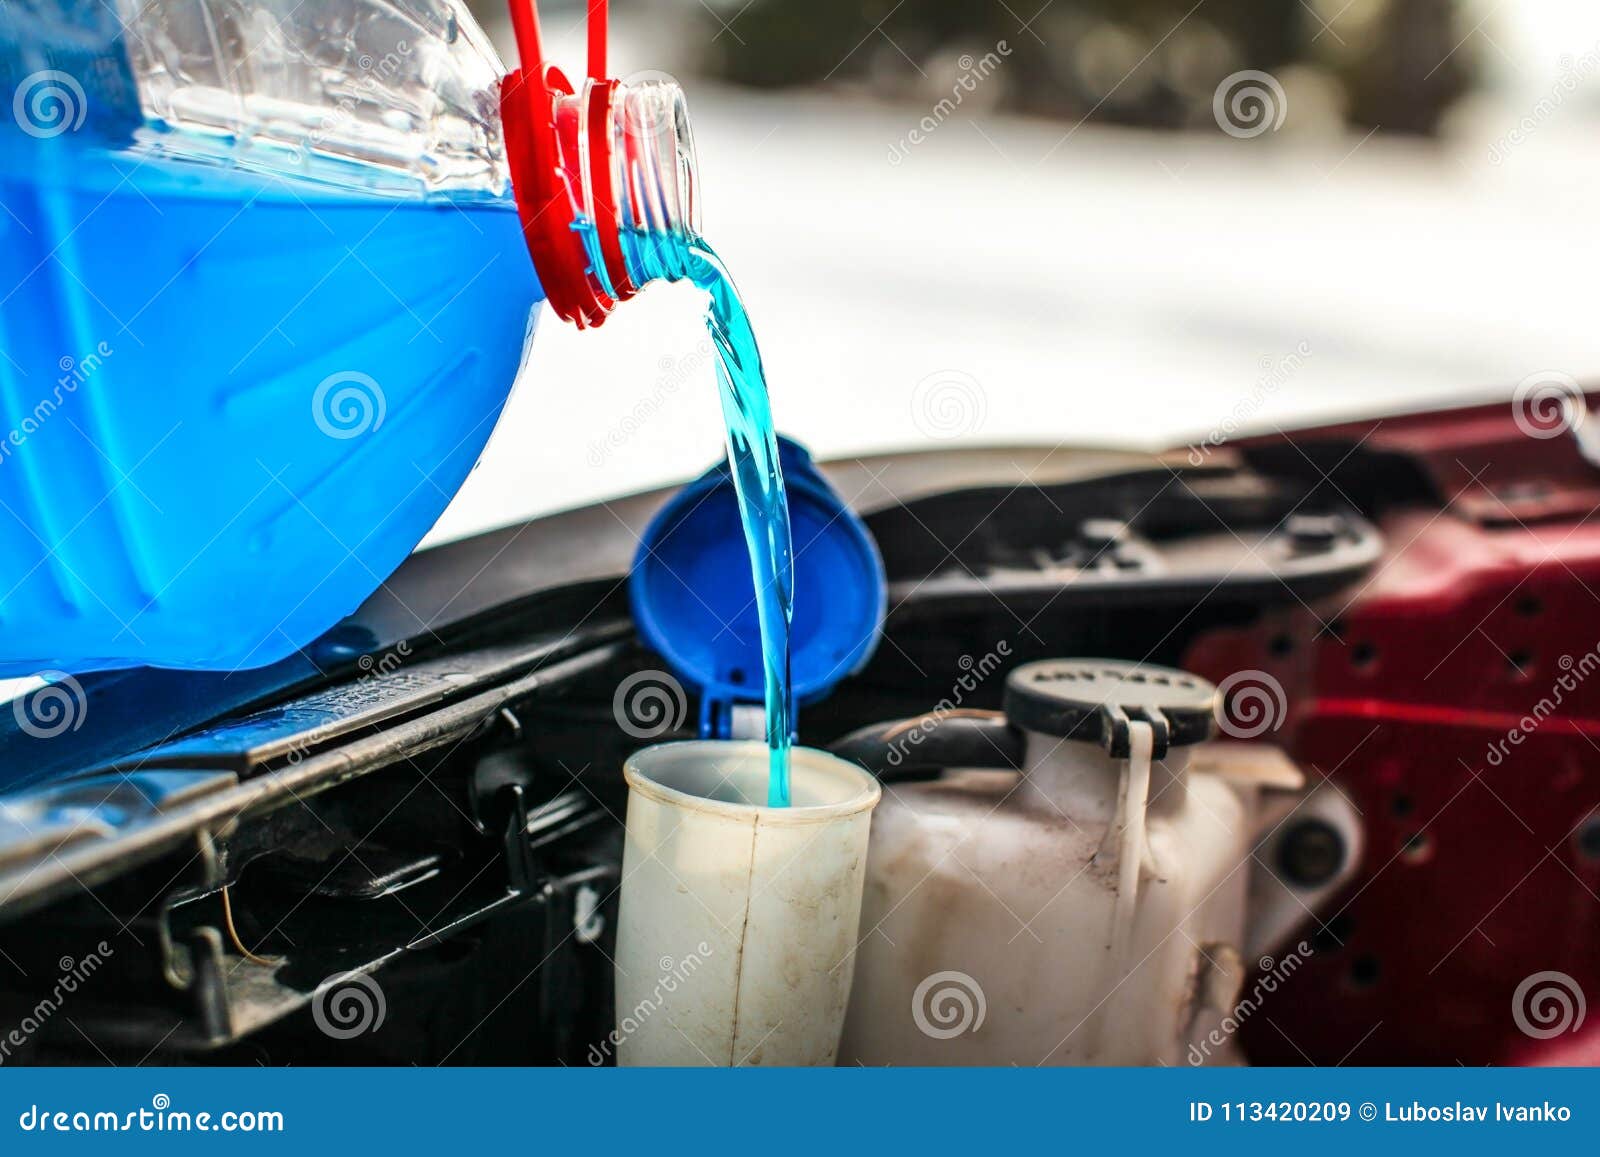 detail on pouring antifreeze liquid screen wash into dirty car